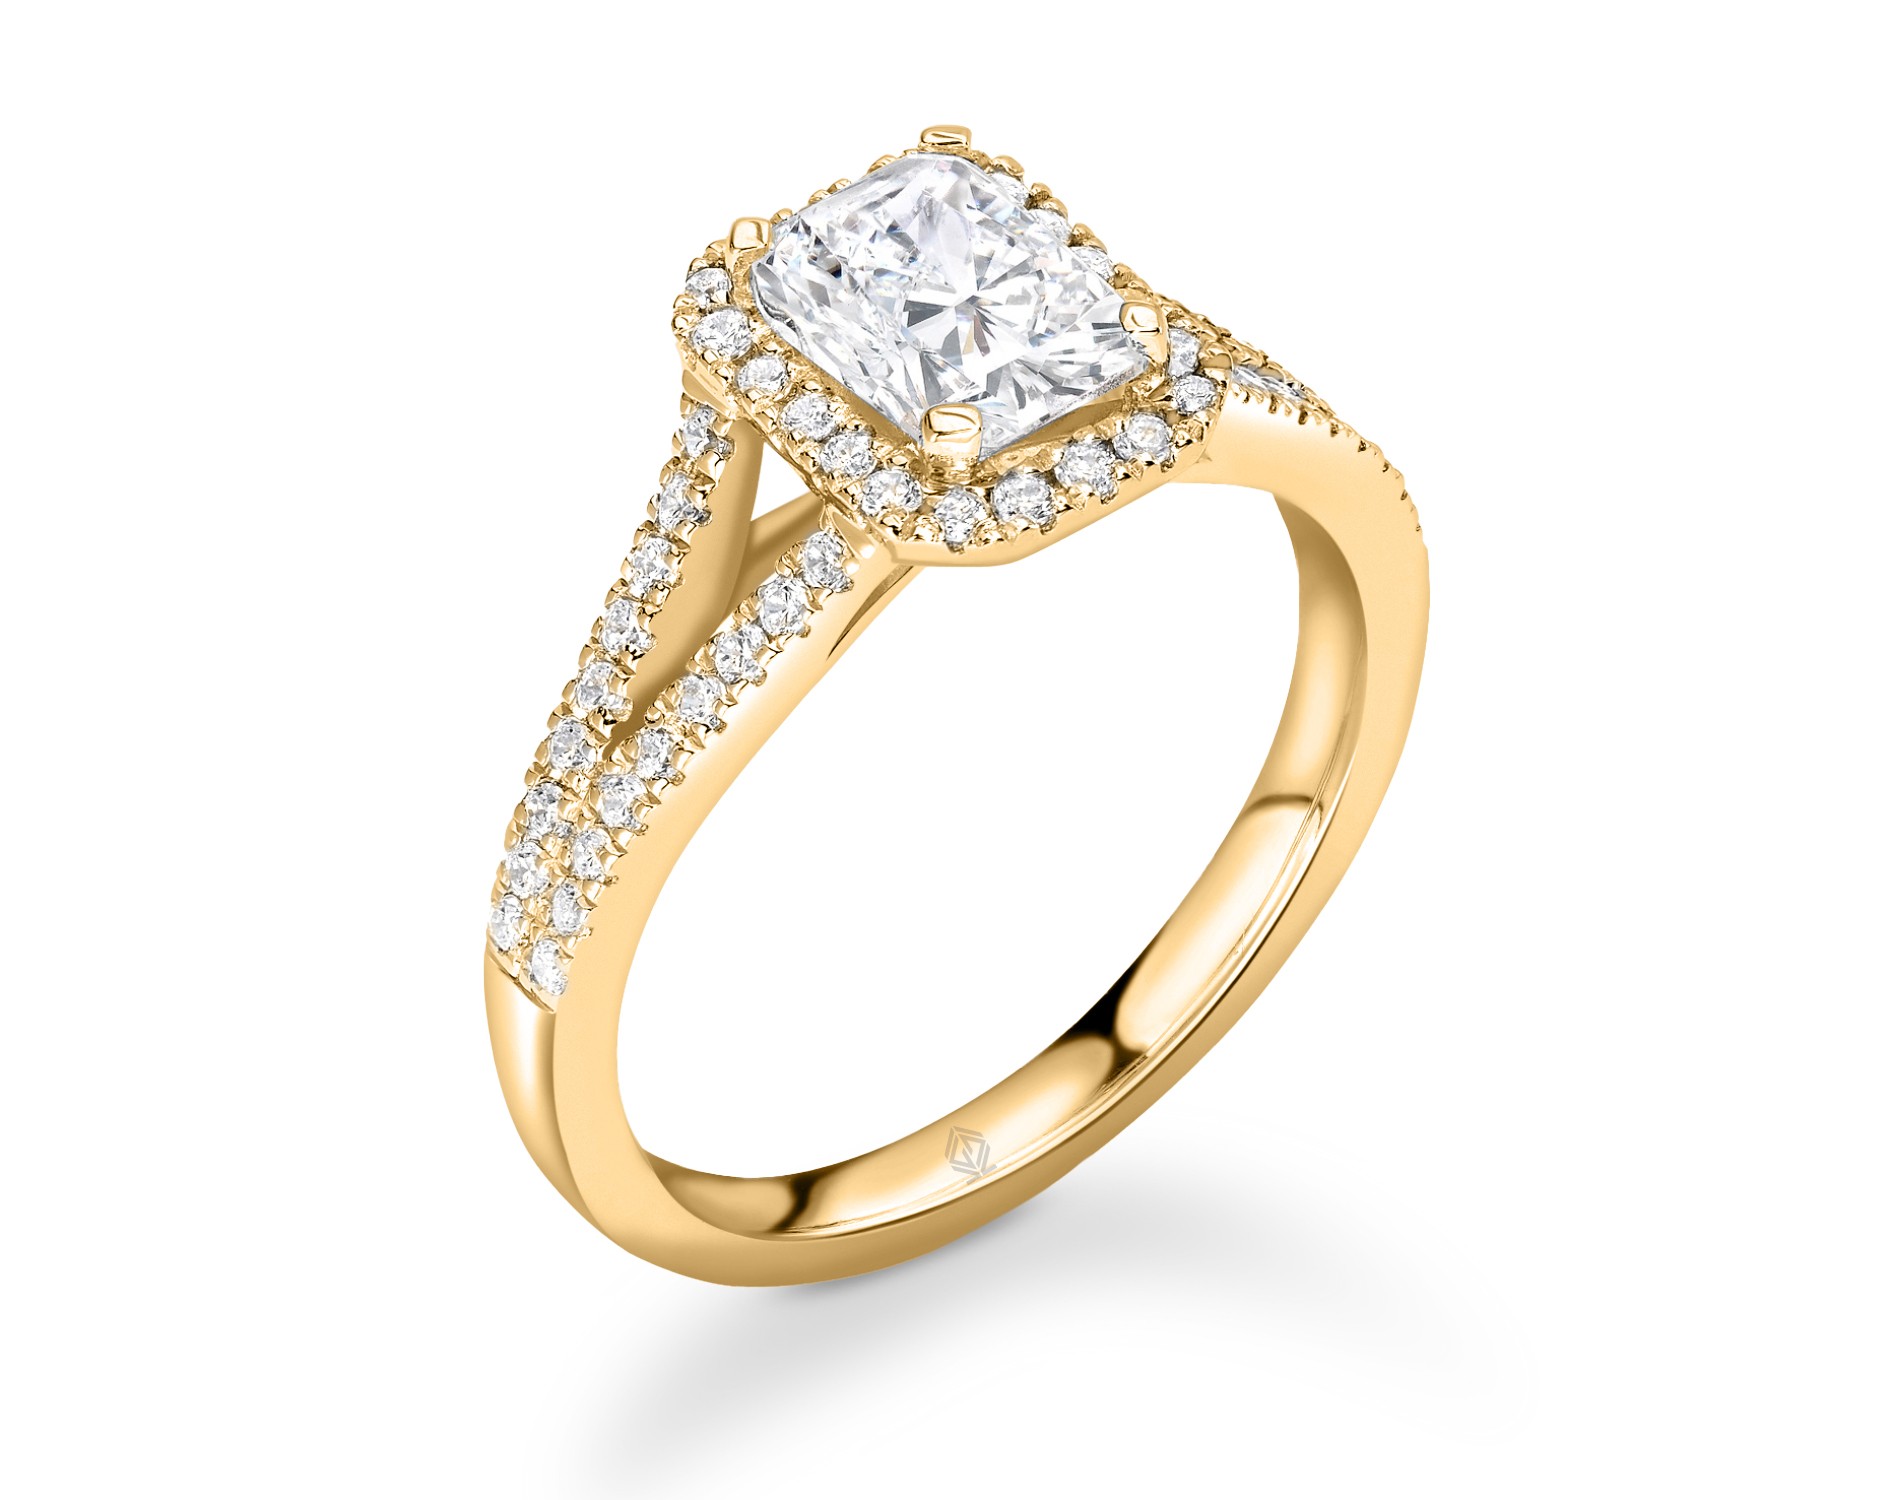 18K YELLOW GOLD EMERALD CUT HALO DIAMOND ENGAGEMENT RING WITH SIDE STONES IN SPLIT SHANK PAVE SET